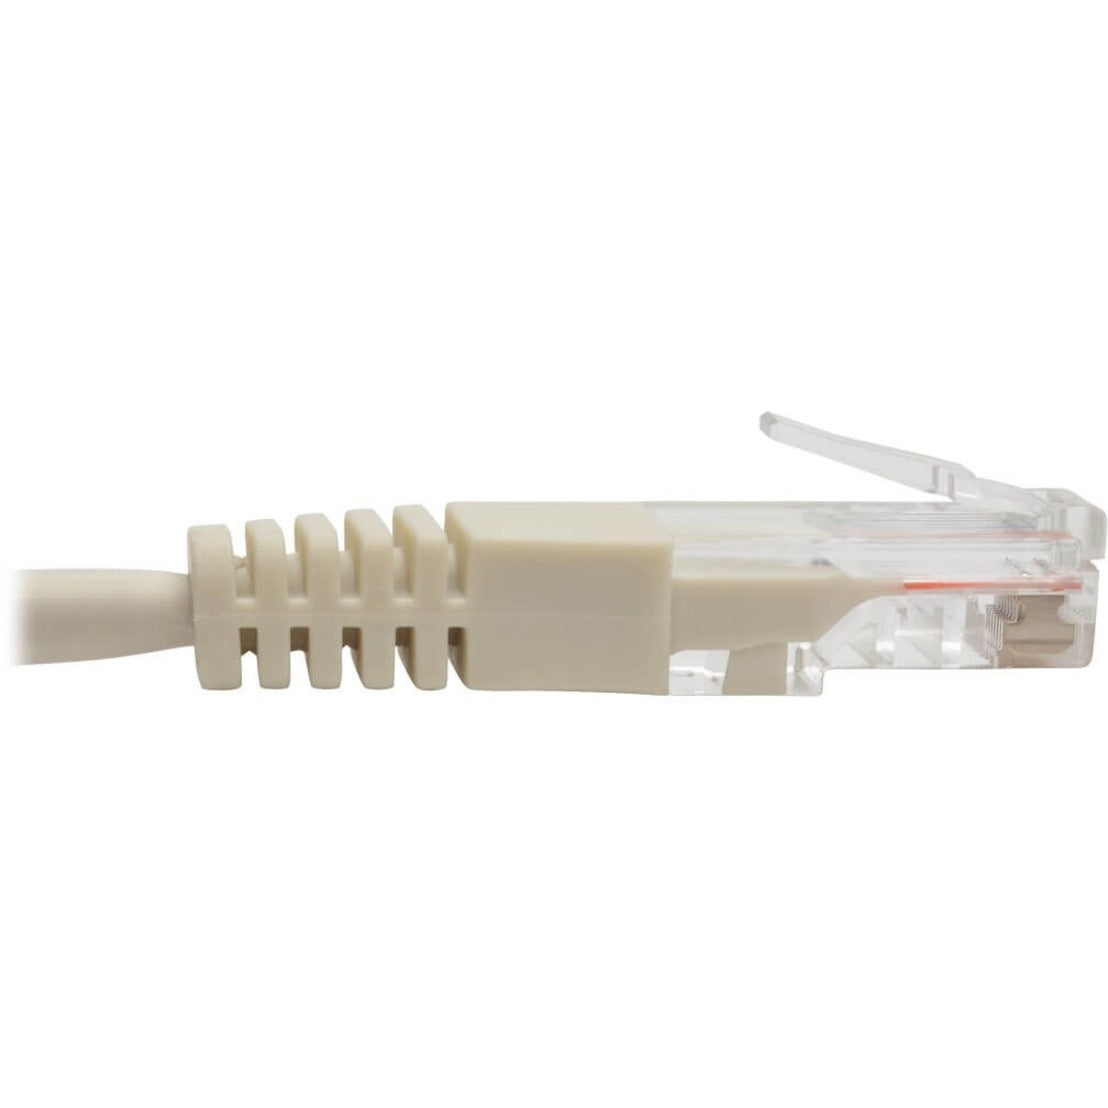 Tripp Lite N002-001-WH Cat5e UTP Patch Cable, 1 ft, White, Molded RJ45 M/M Patch Cord